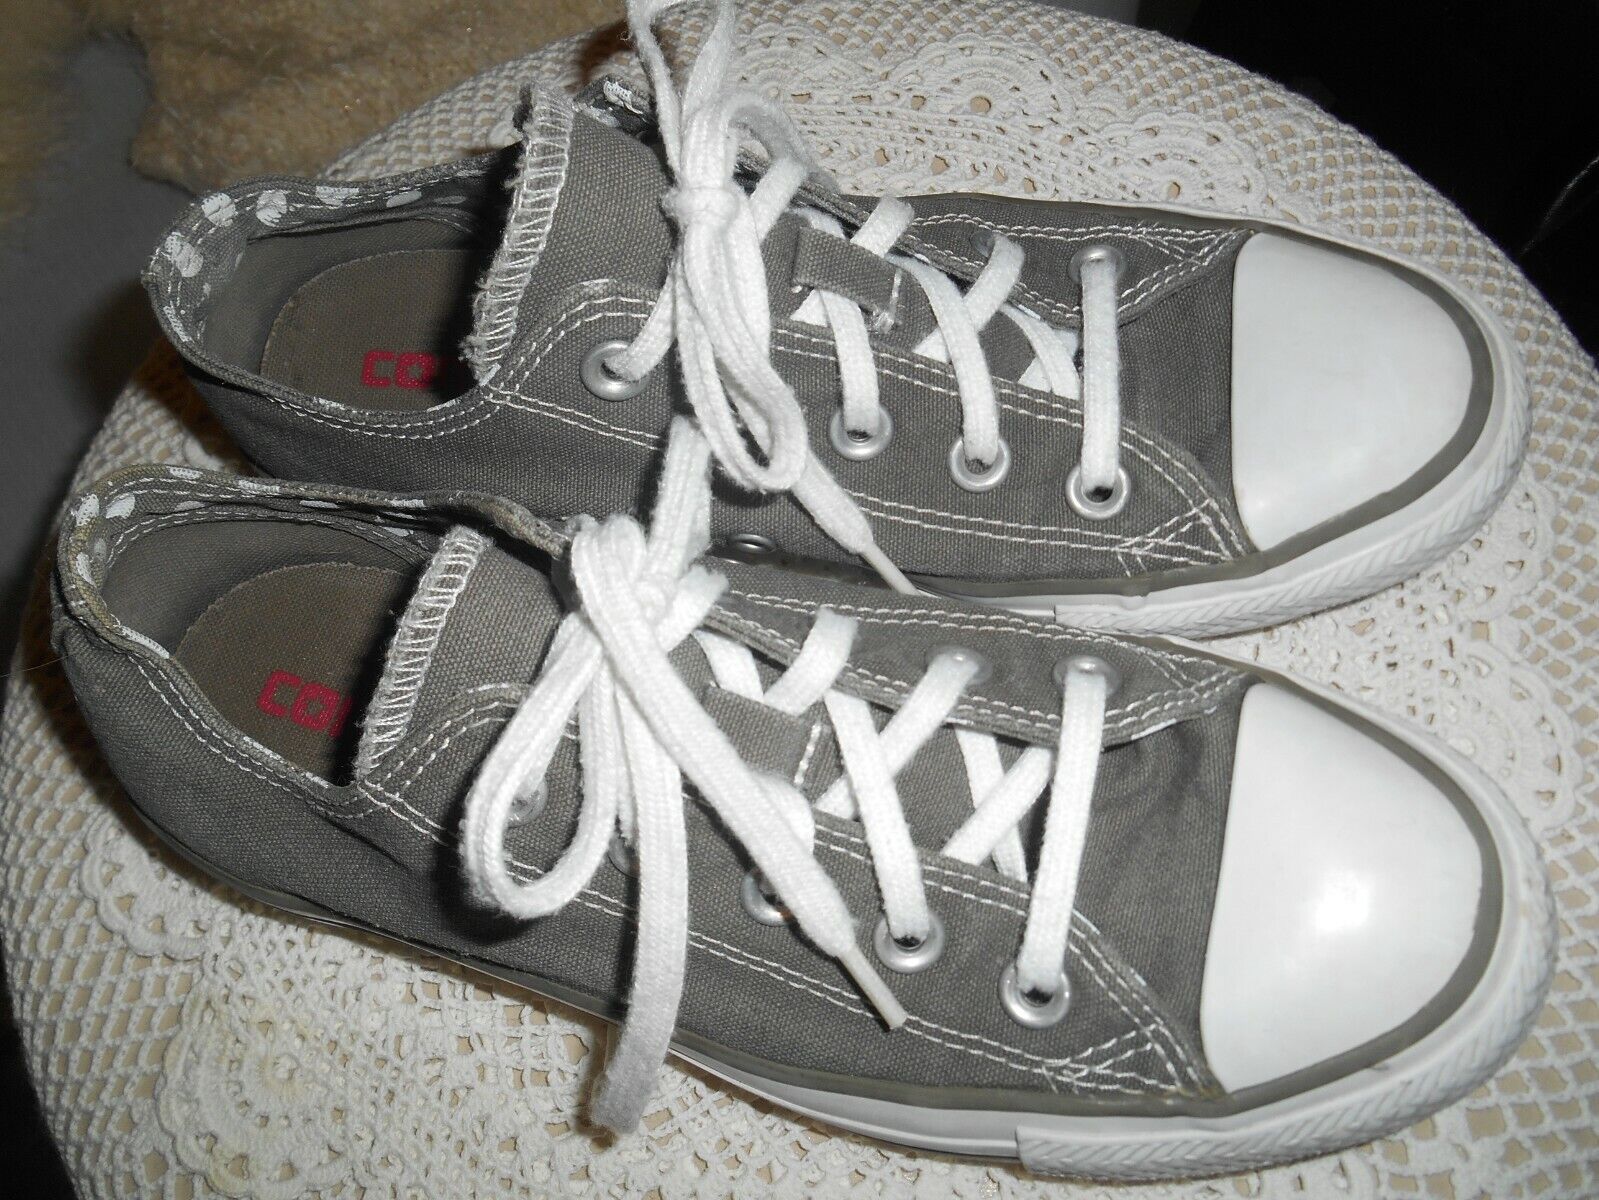 CONVERSE ALL STAR Tennis SHOES CHUCK TAYLOR Gym LOW-TOP SNEAKER Athletic 6  | eBay